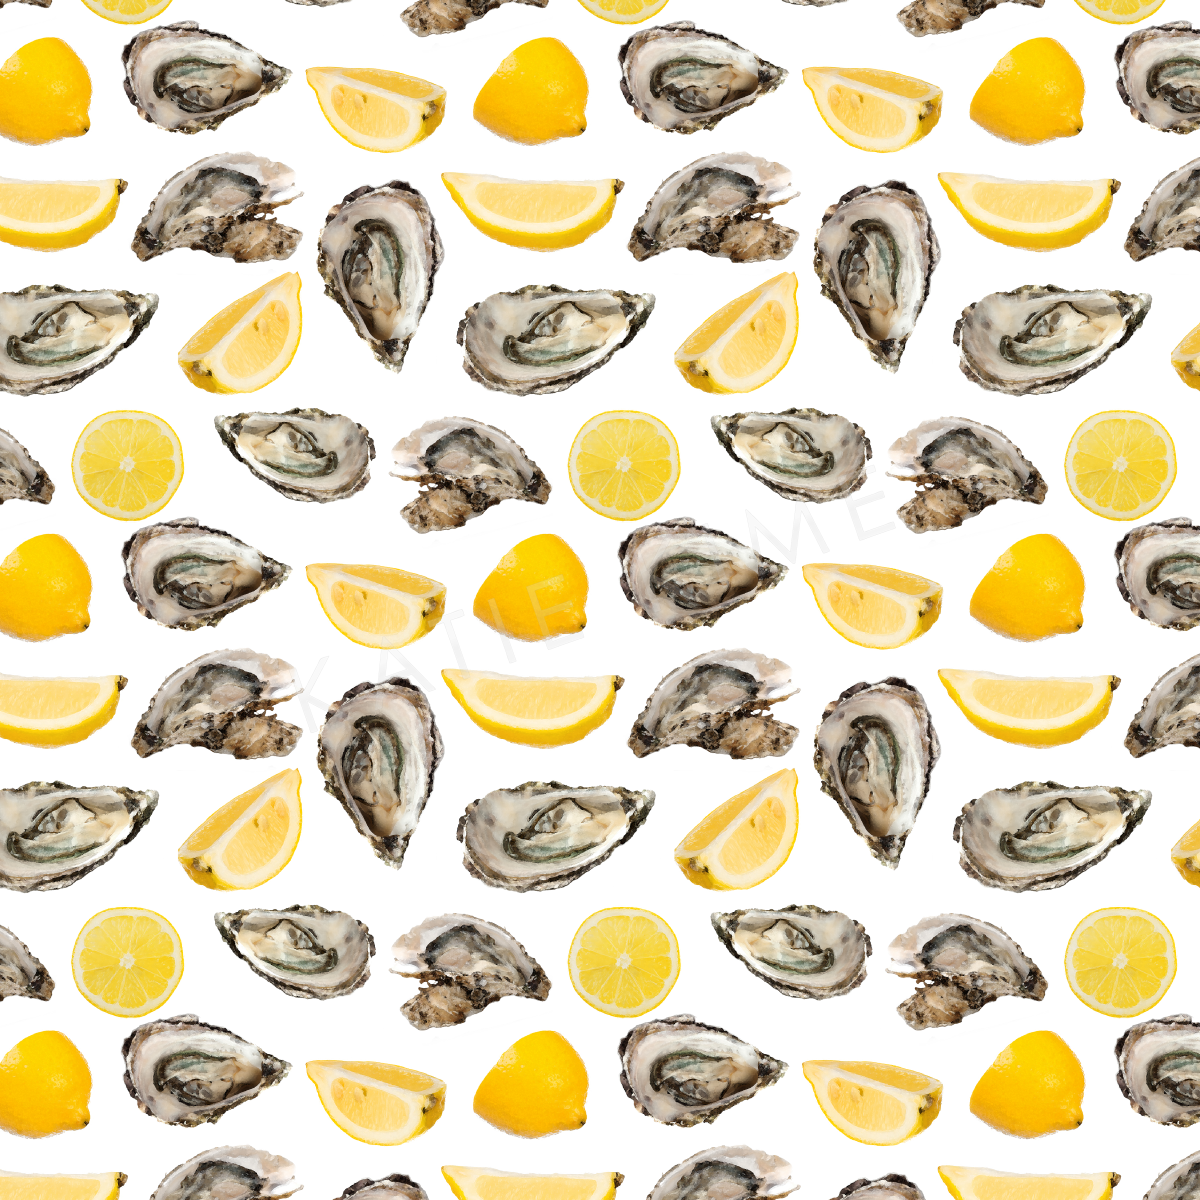 Wallpaper The World is Your Oyster Wallpaper Katie Kime